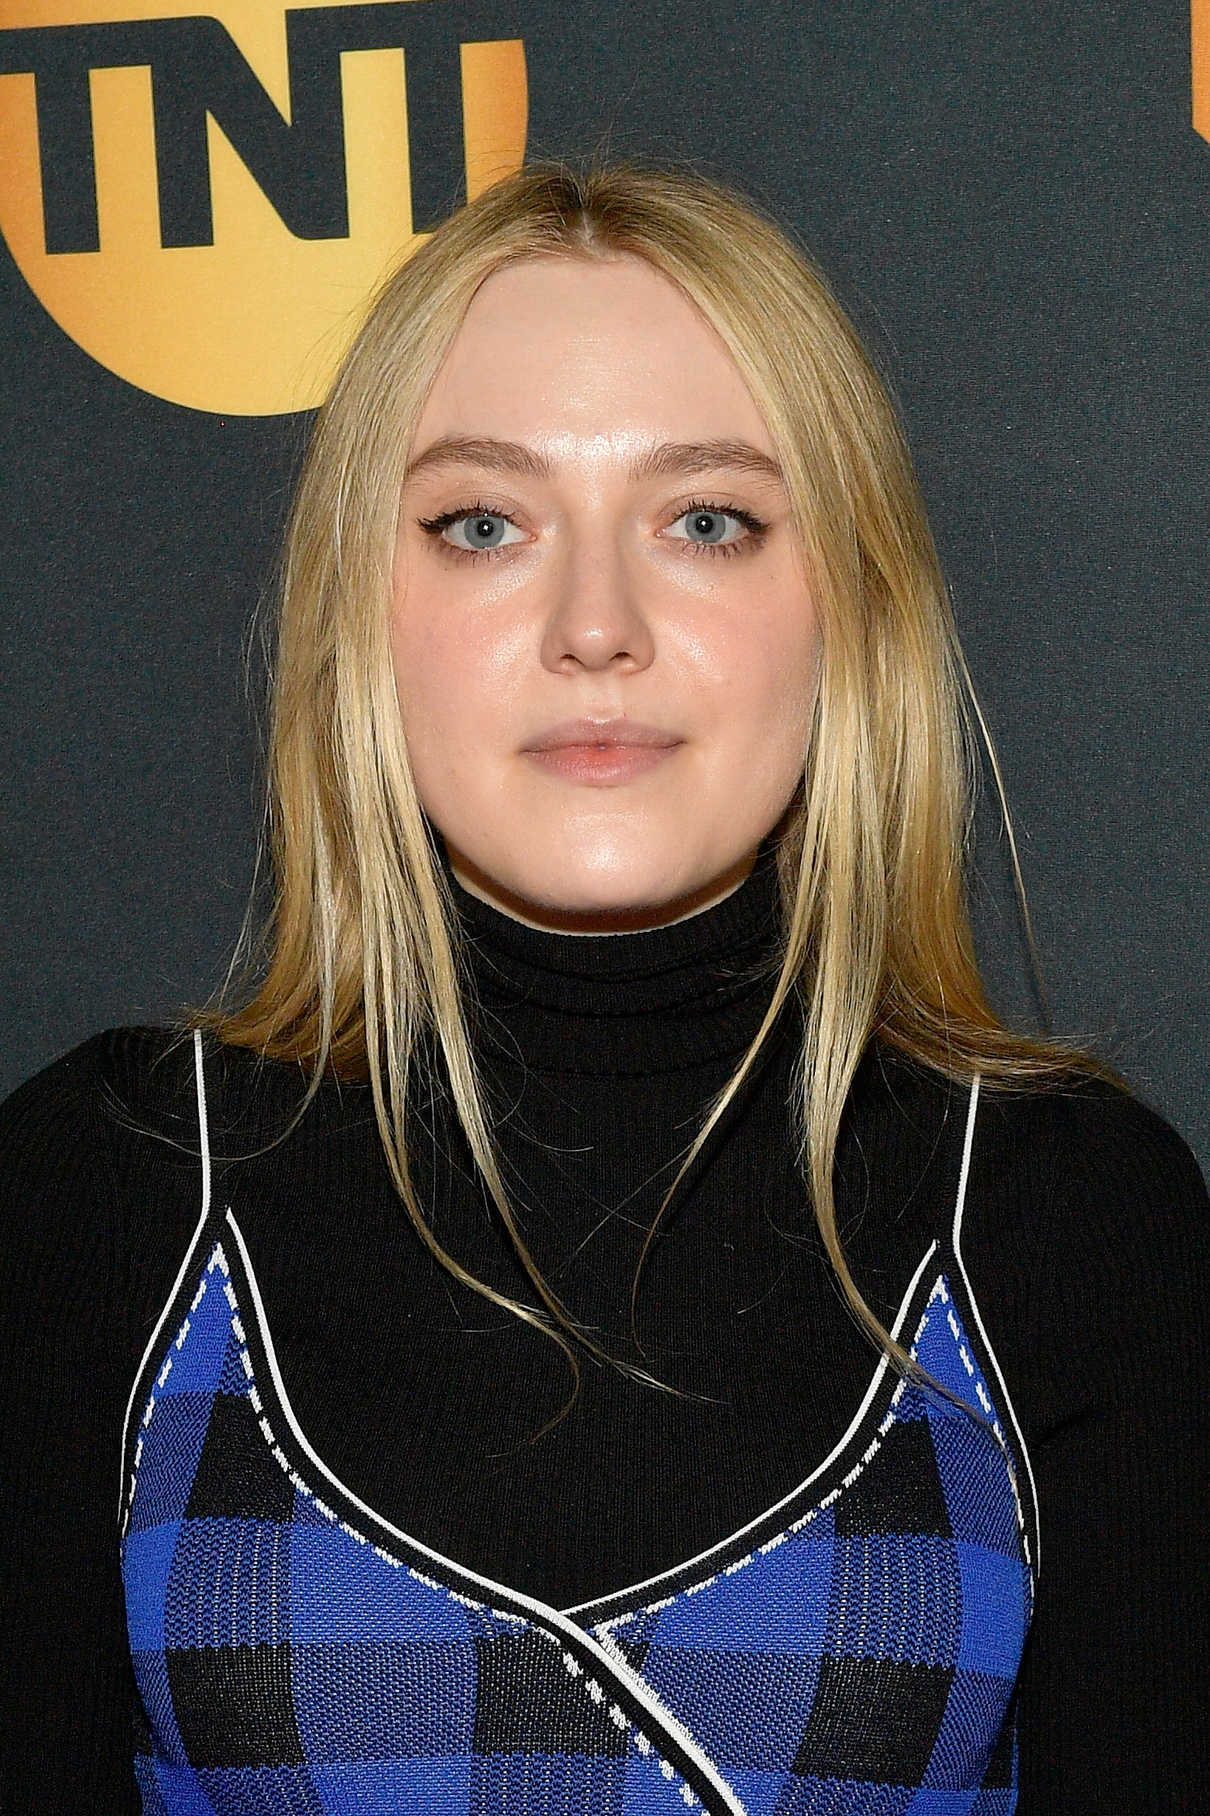 Dakota Fanning at the TNT And TBS Lodge During 2018 Sundance Film Festival in Park City 01/19/2018-5